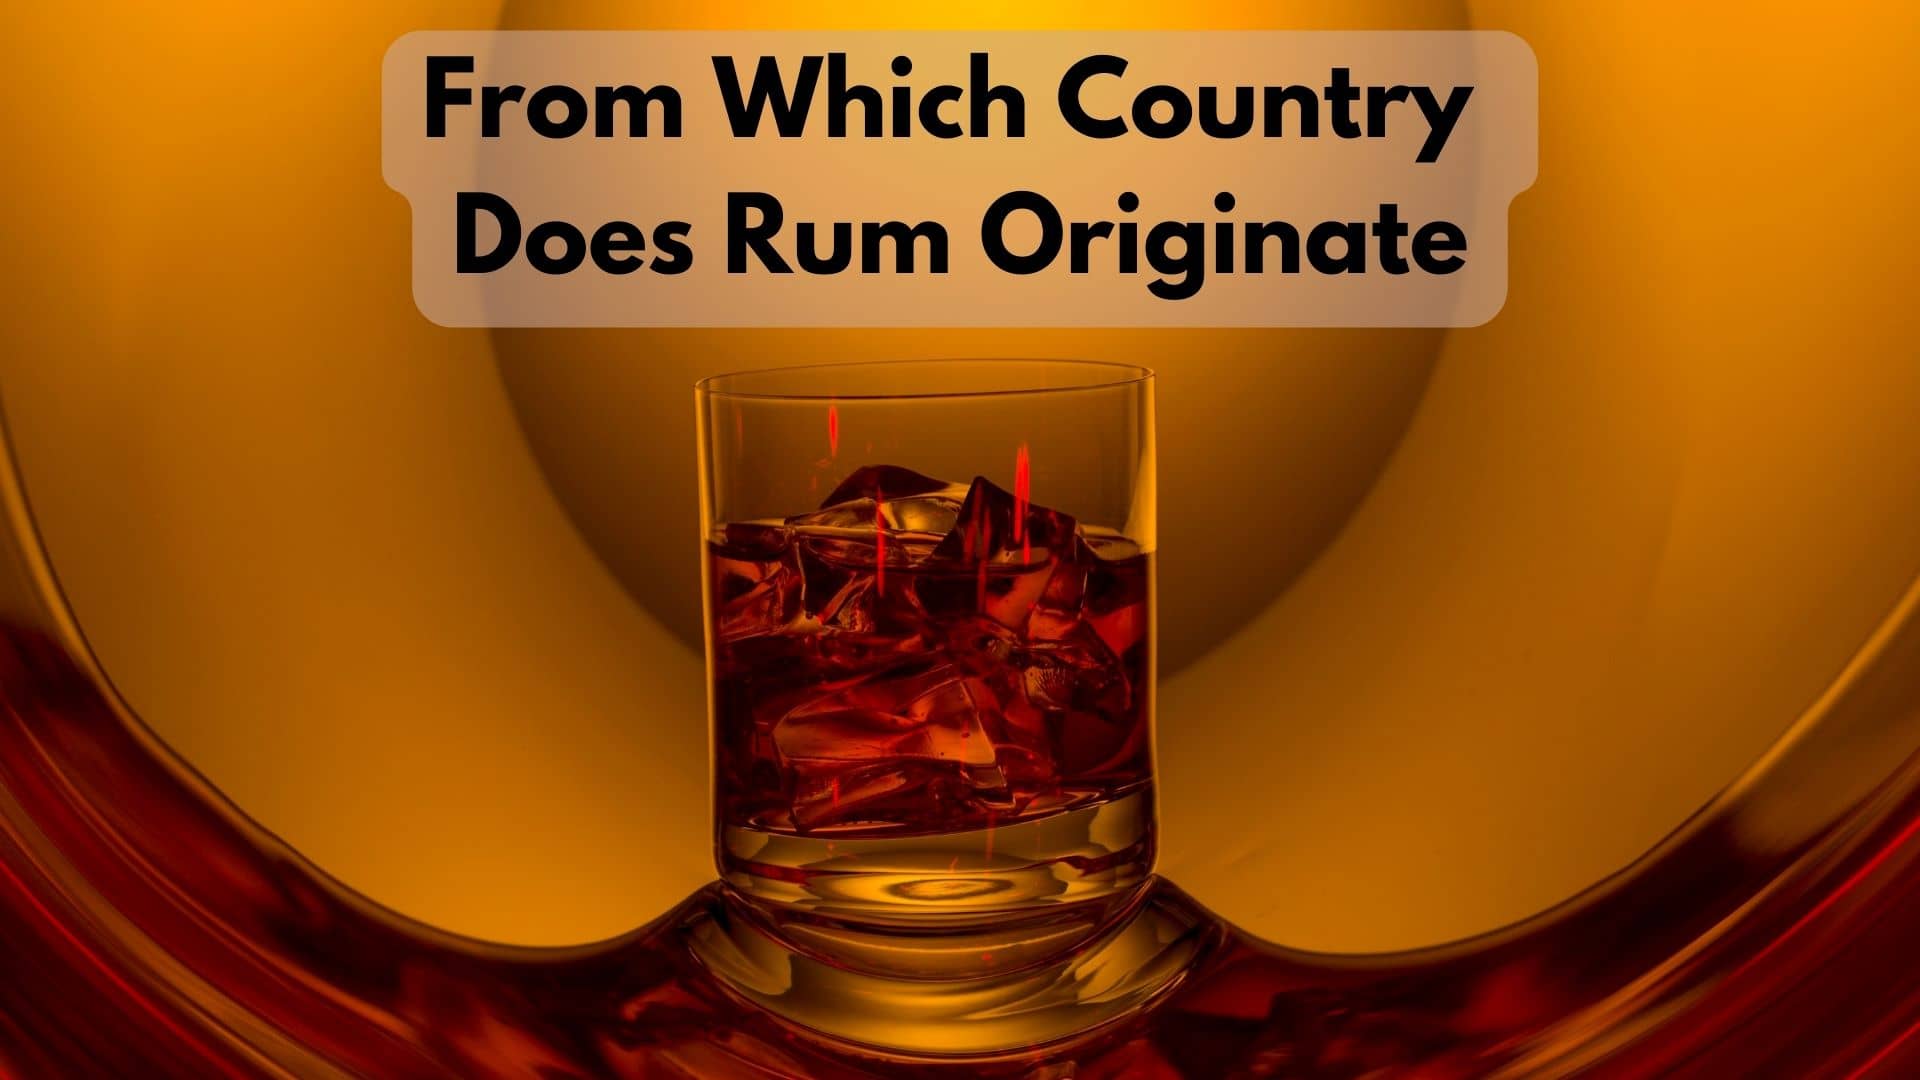 From Which Country Does Rum Originate